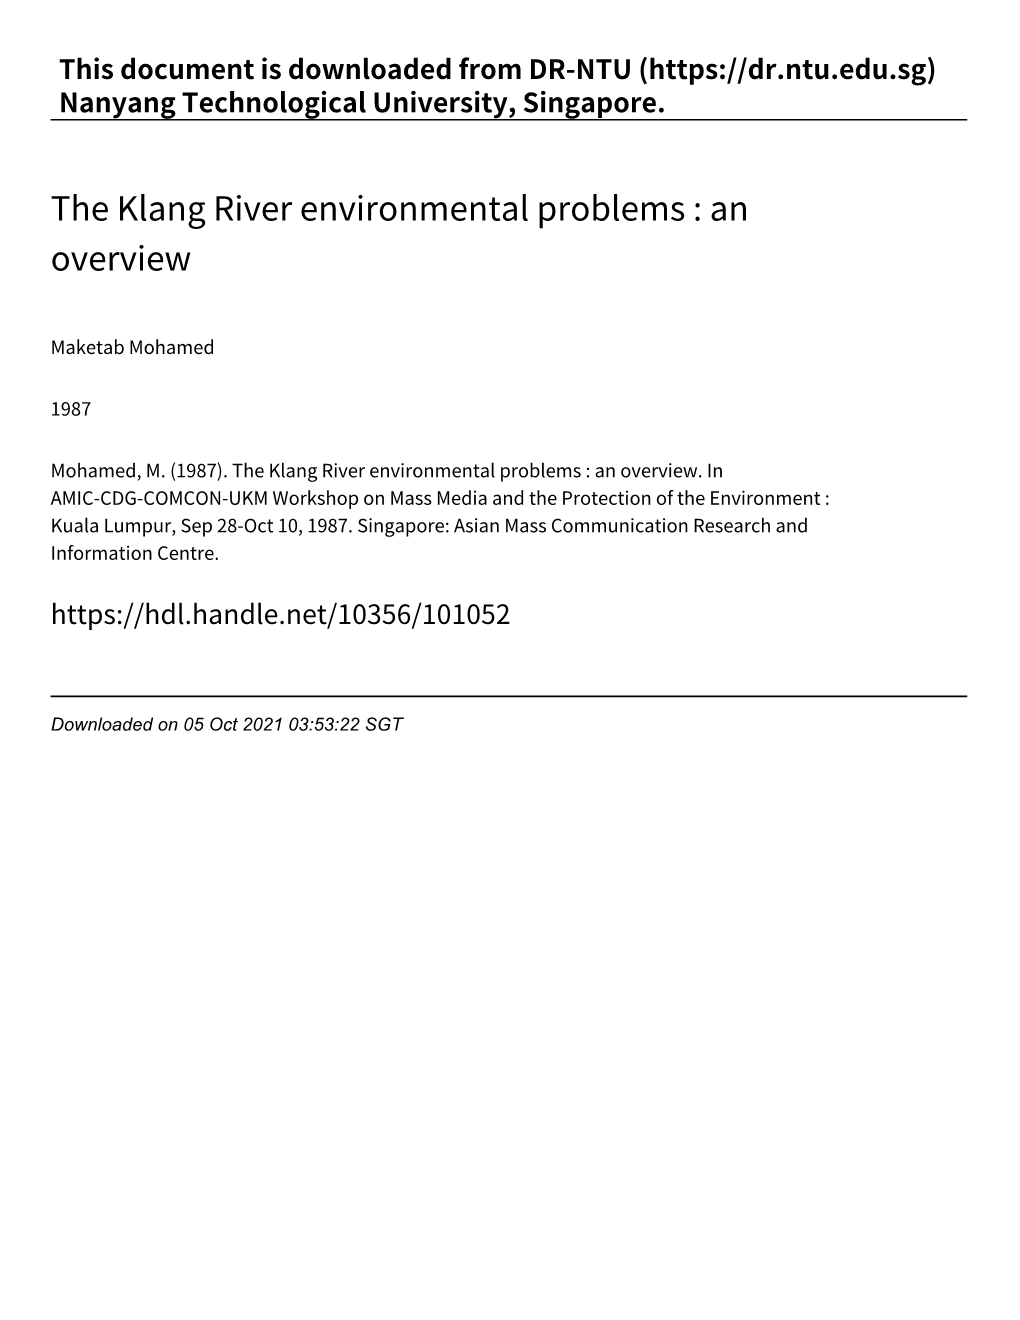 The Klang River Environmental Problems : an Overview